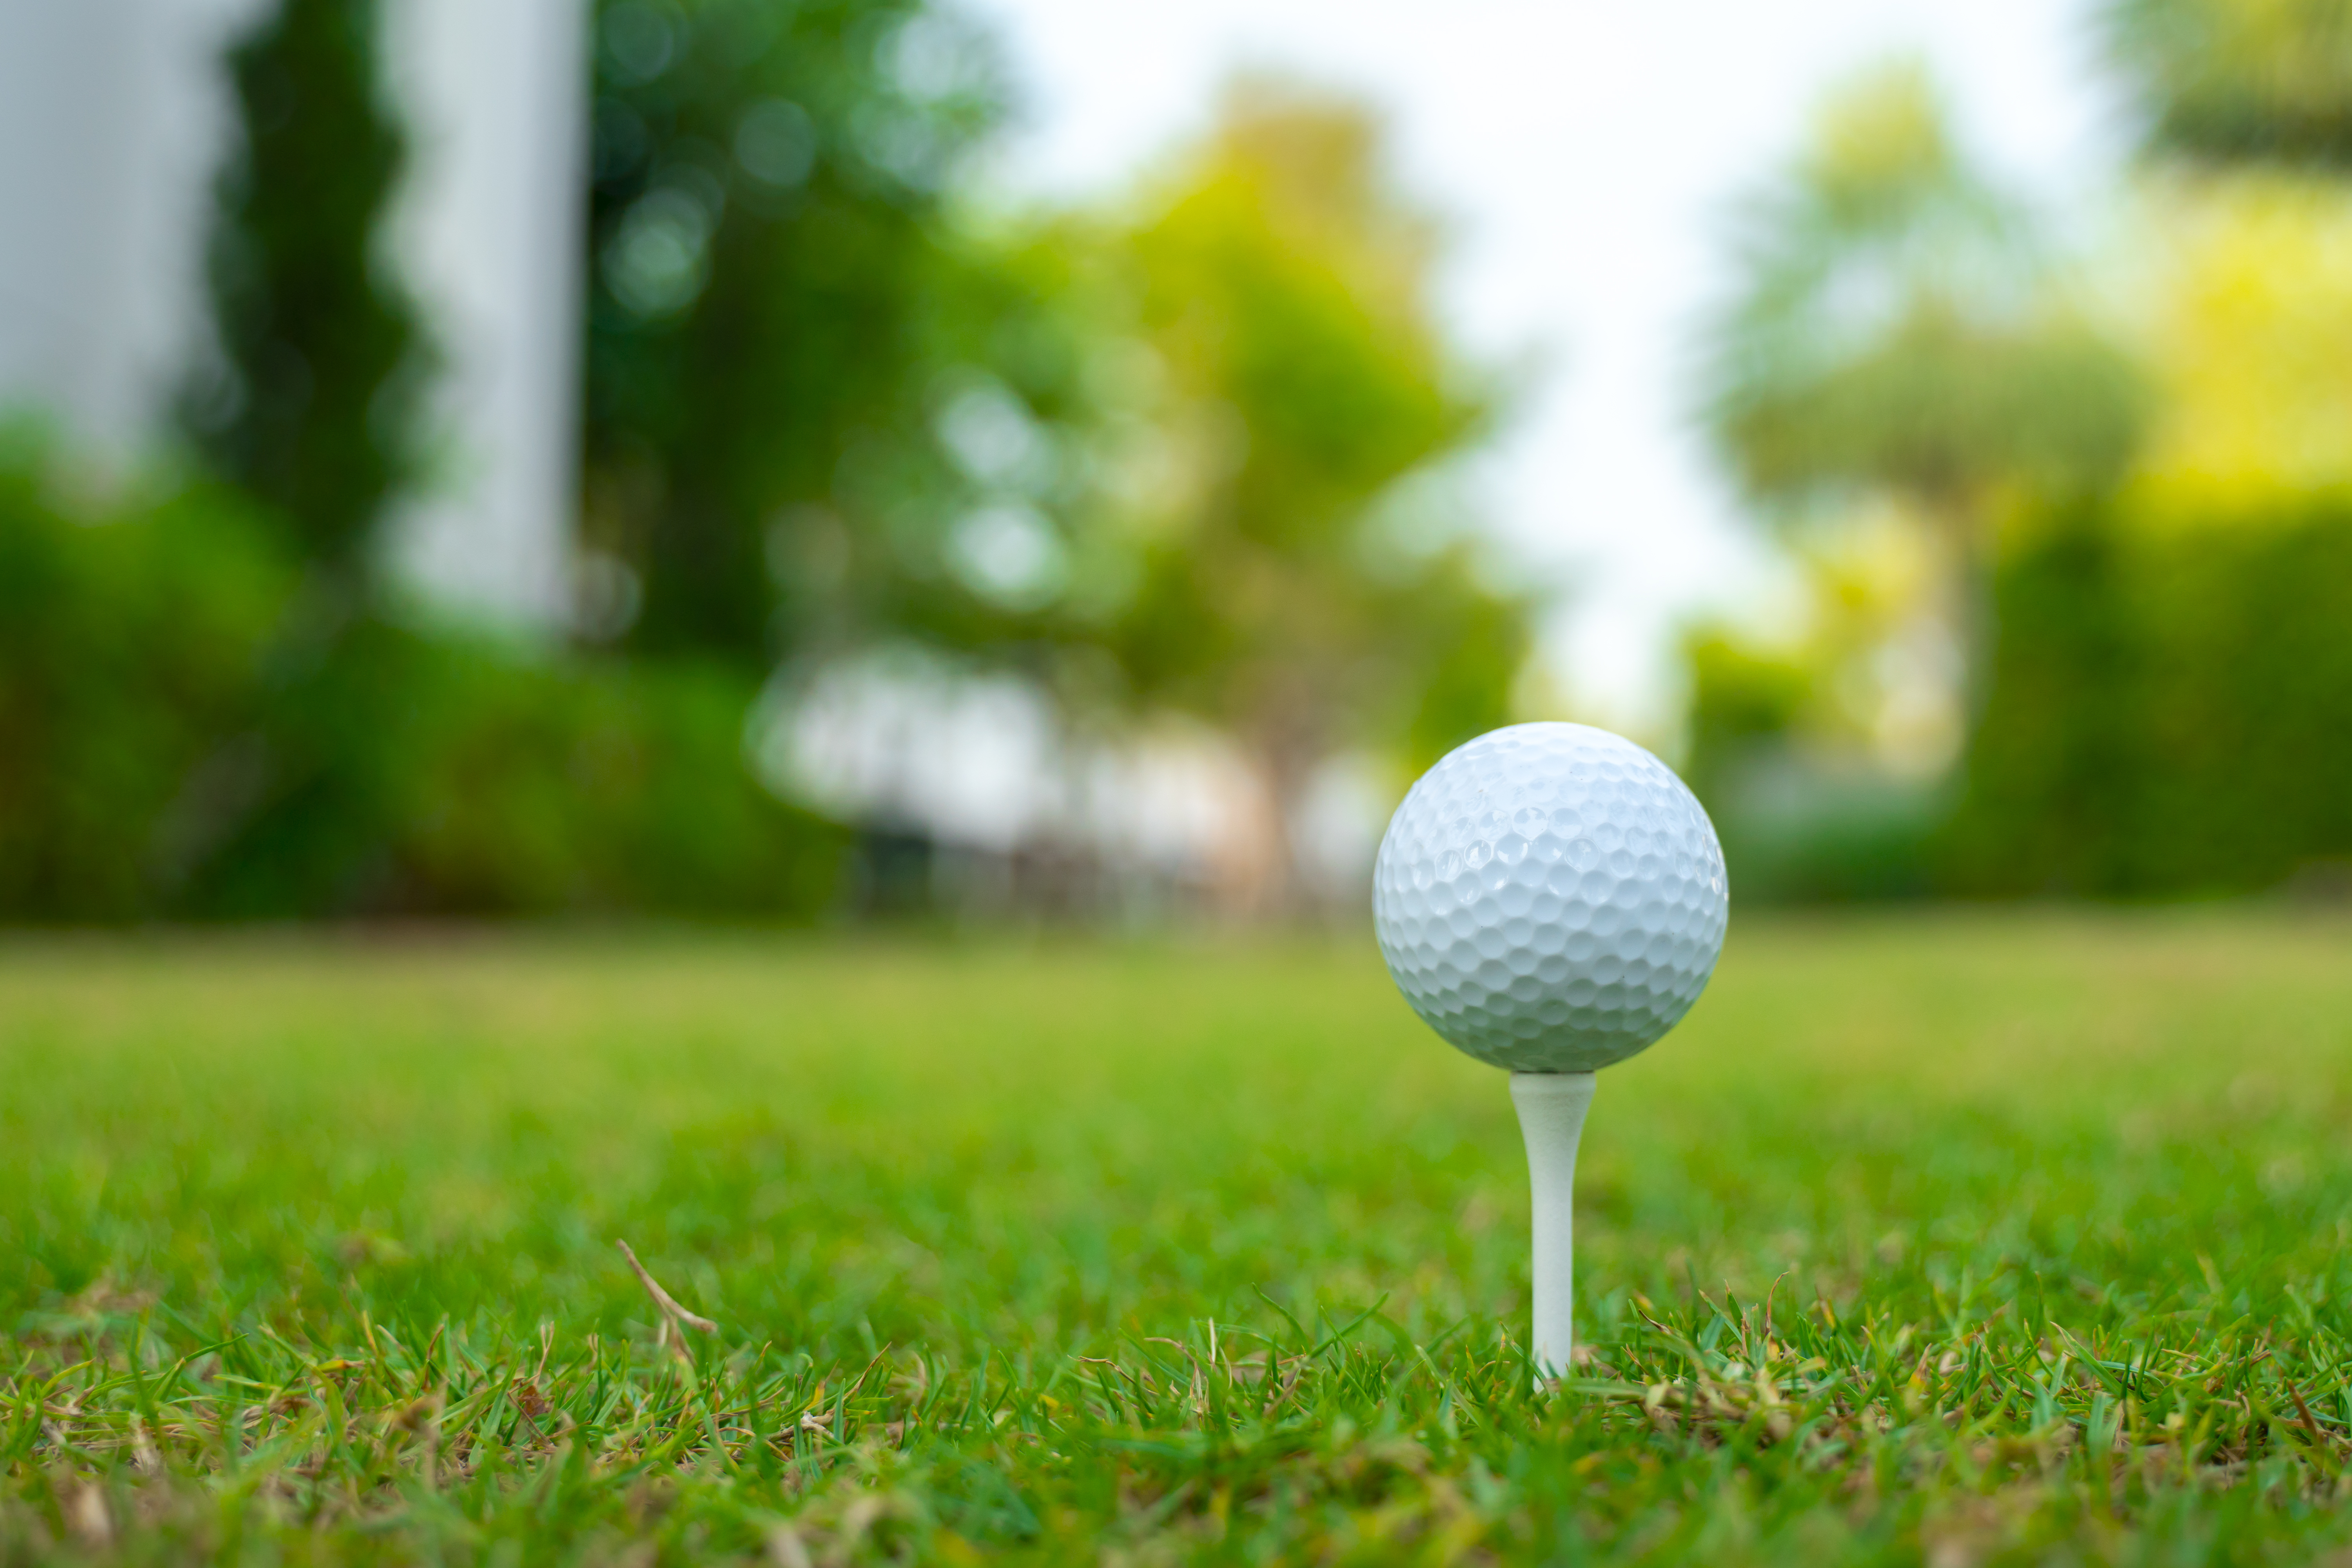 Golf Tee Sizes: Which Tee Length is Best for You?